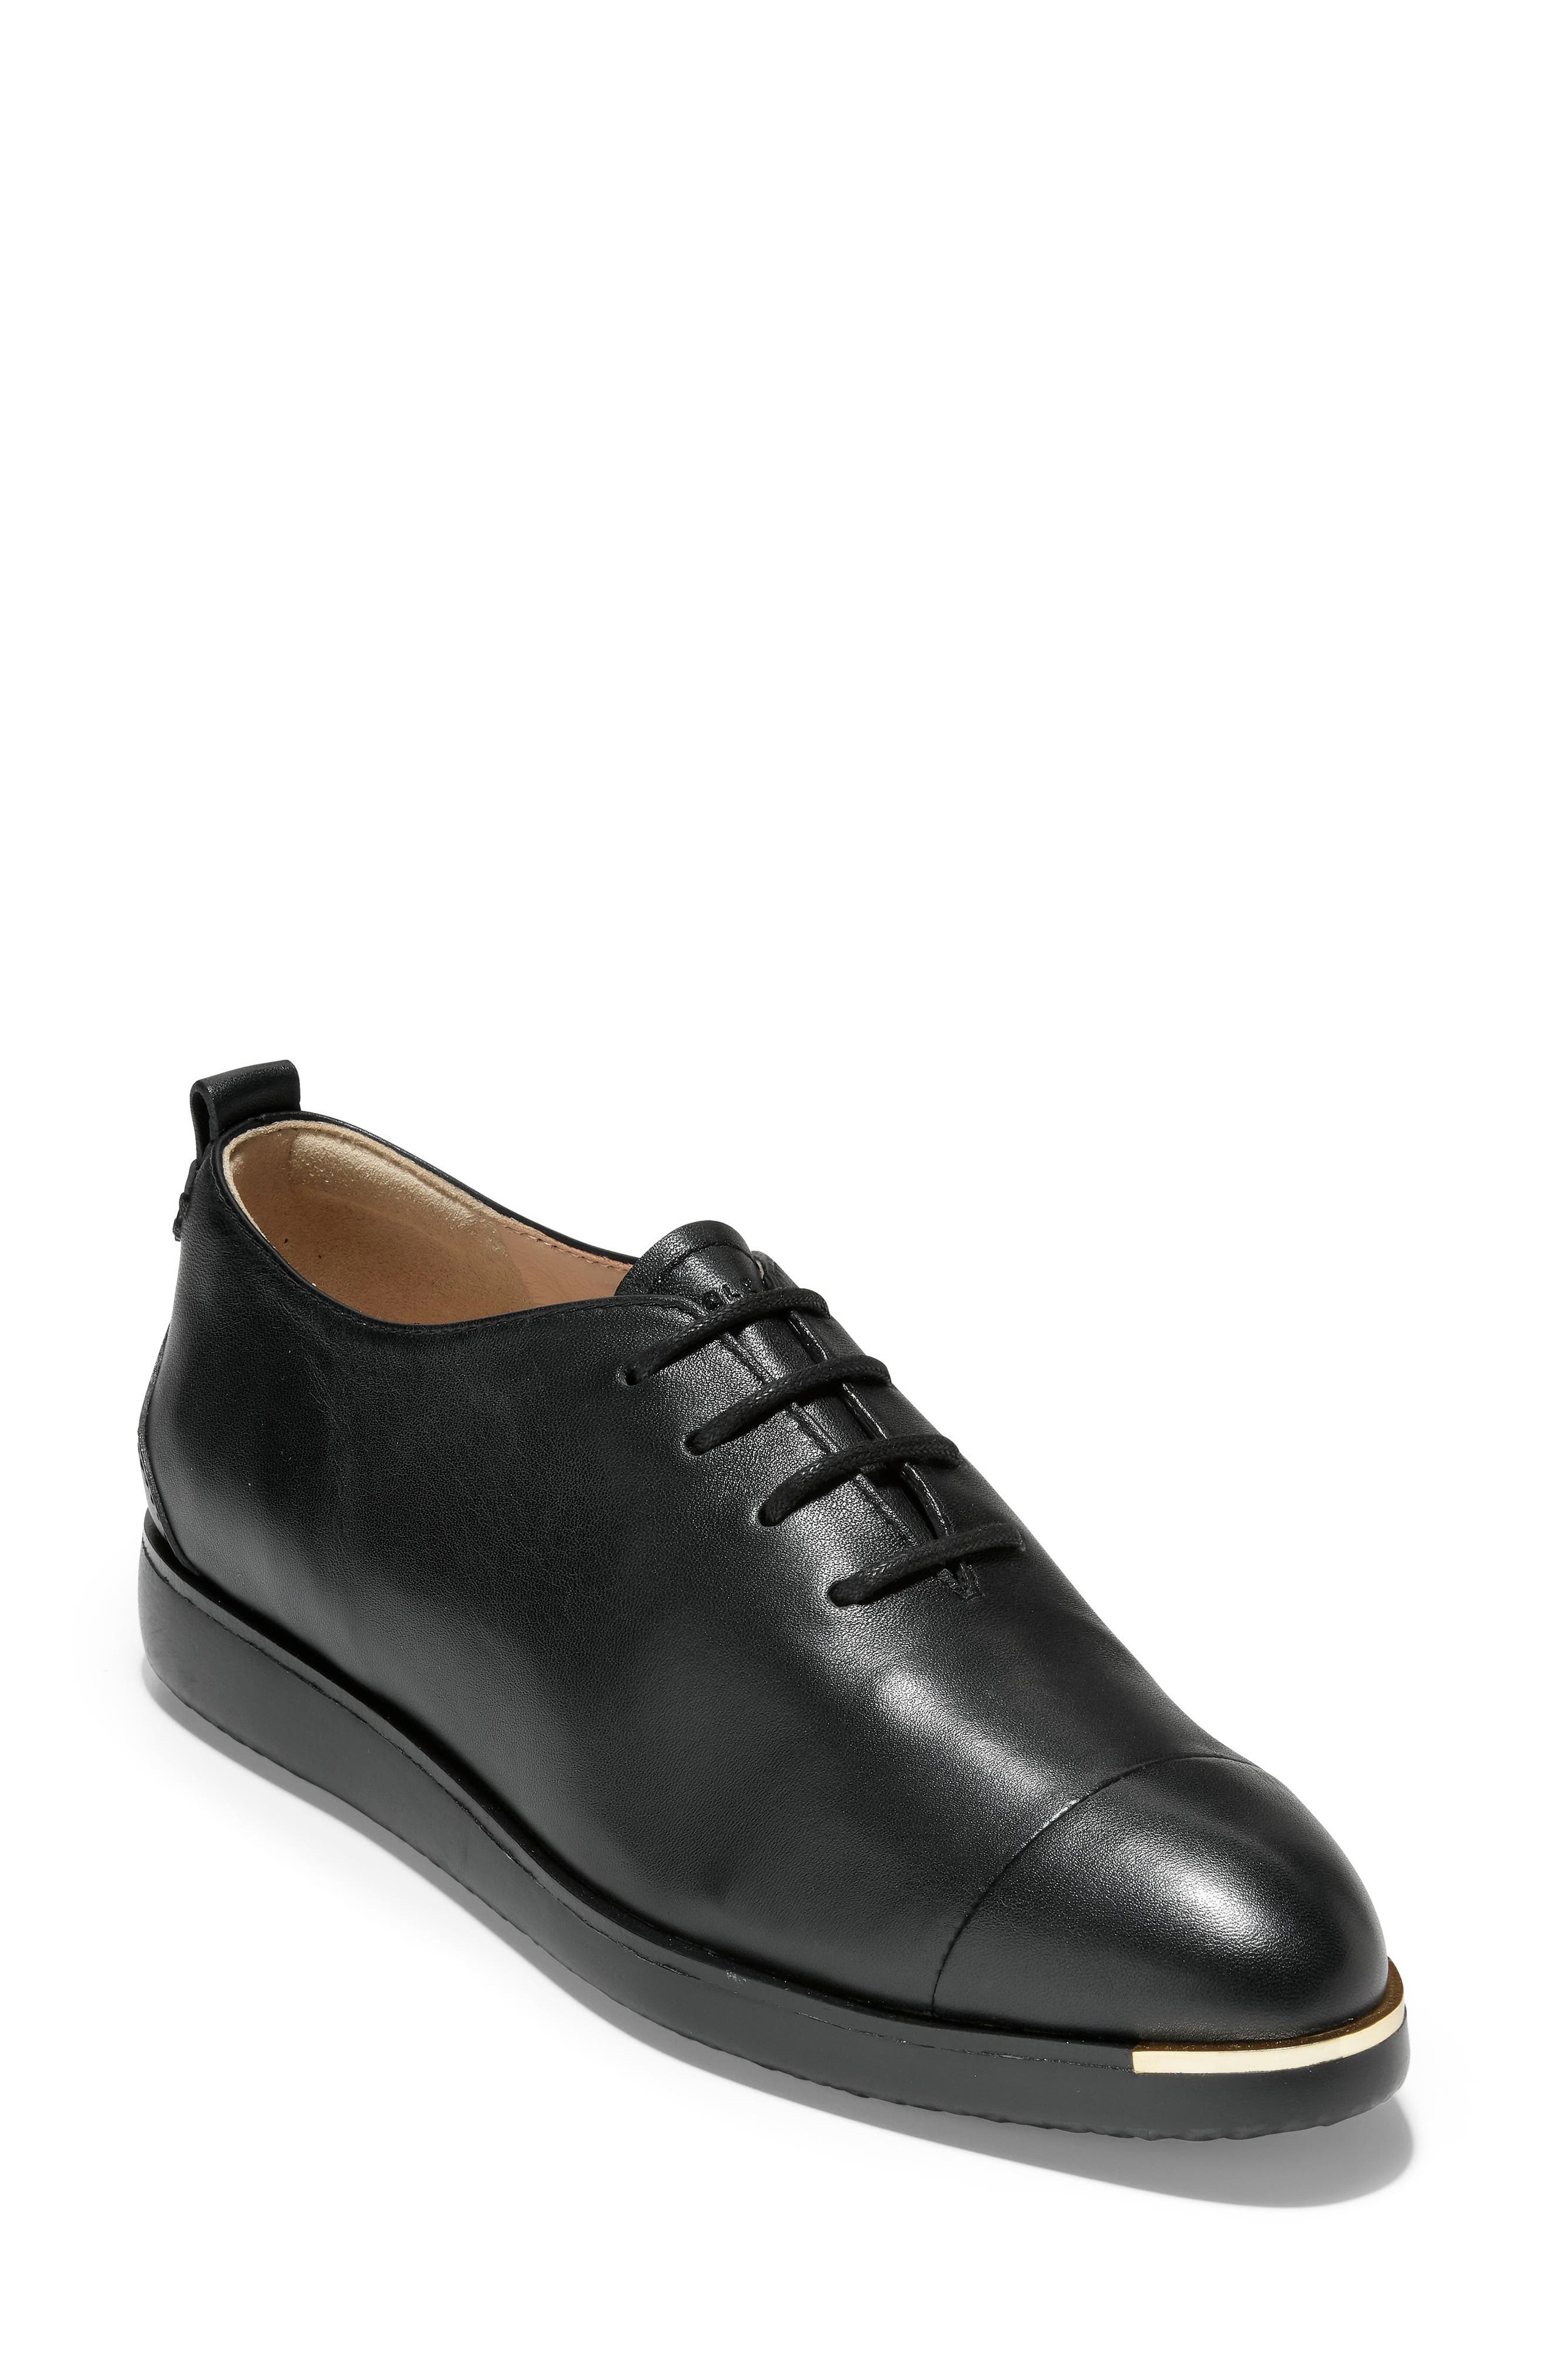 Cole Haan | Grand Ambition Oxford 